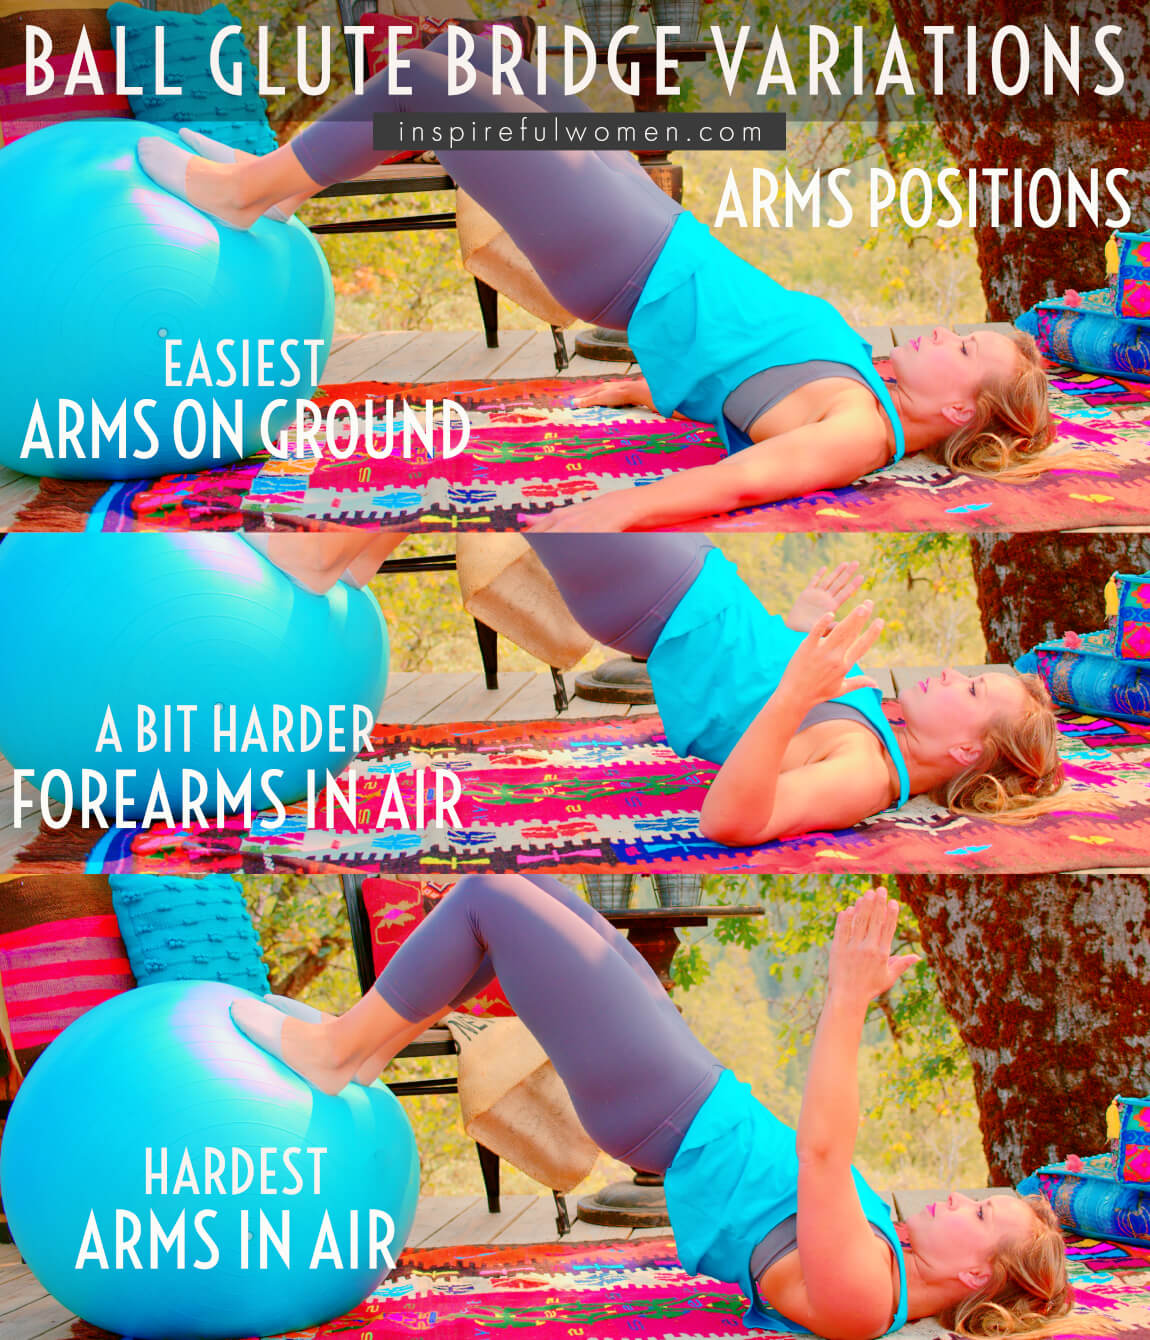 arms-position-stability-ball-glute-bridge-hamstring-gluteus-maximus-home-exercise-variation